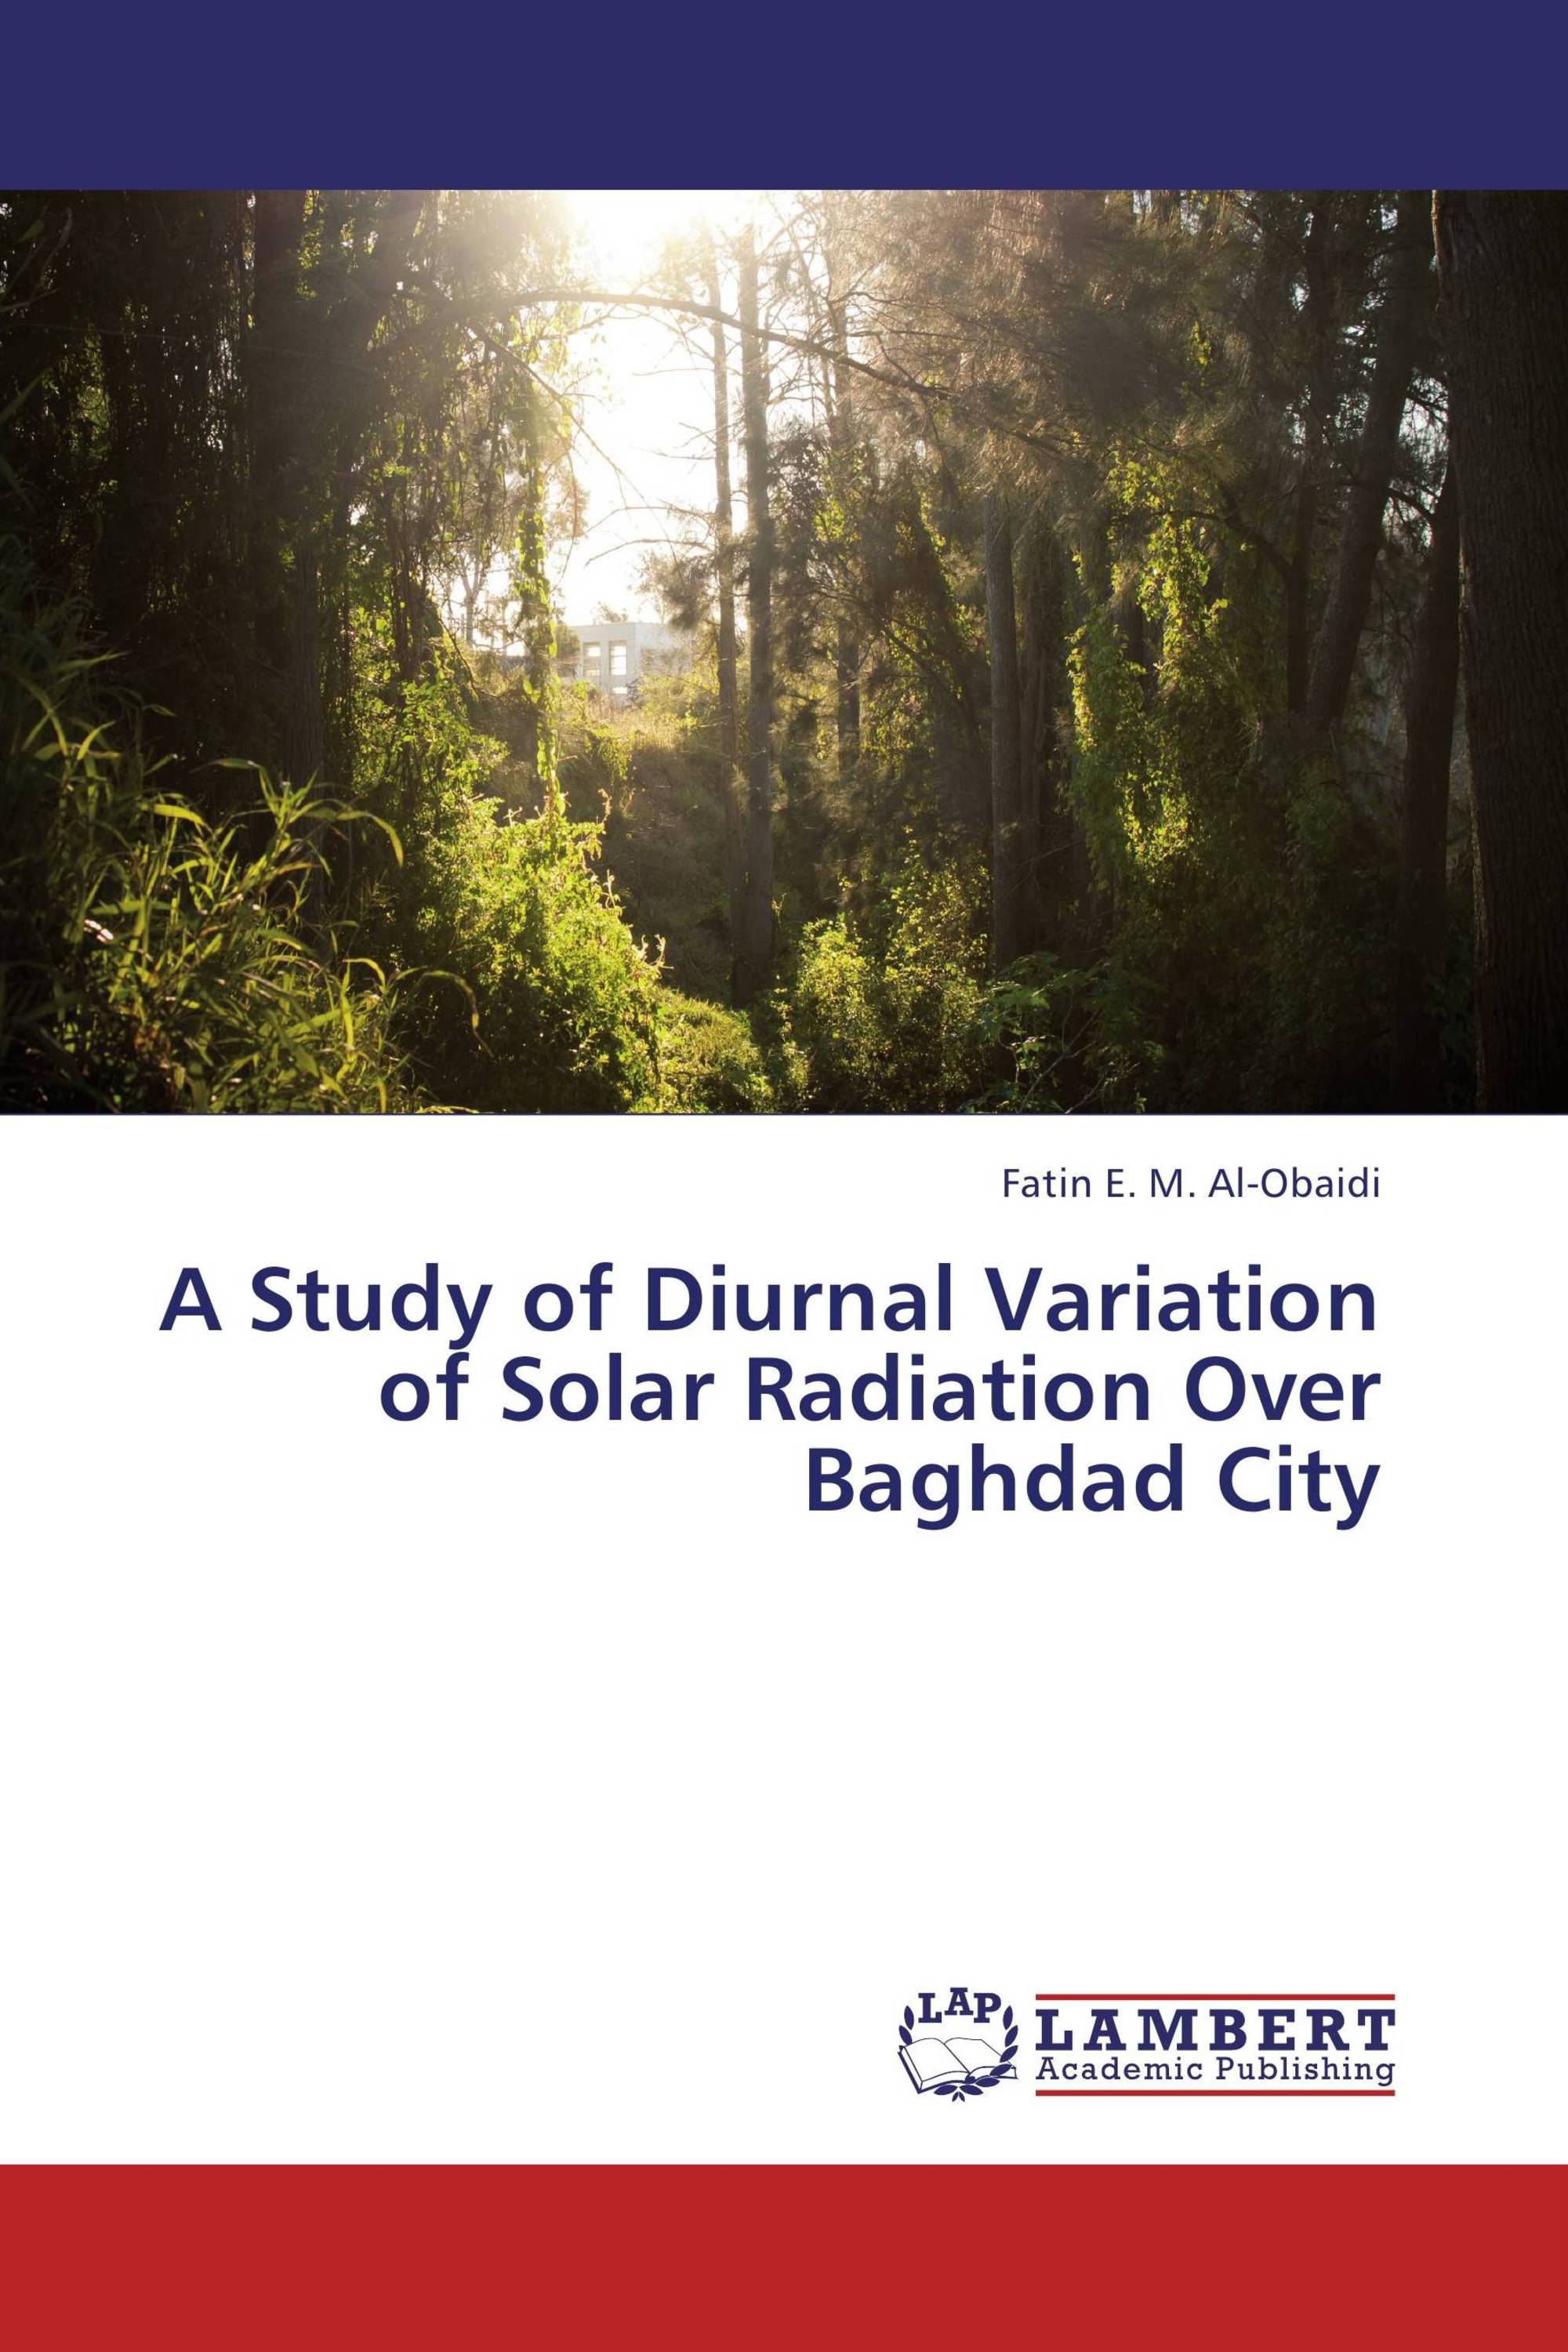 A Study of Diurnal Variation of Solar Radiation Over Baghdad City